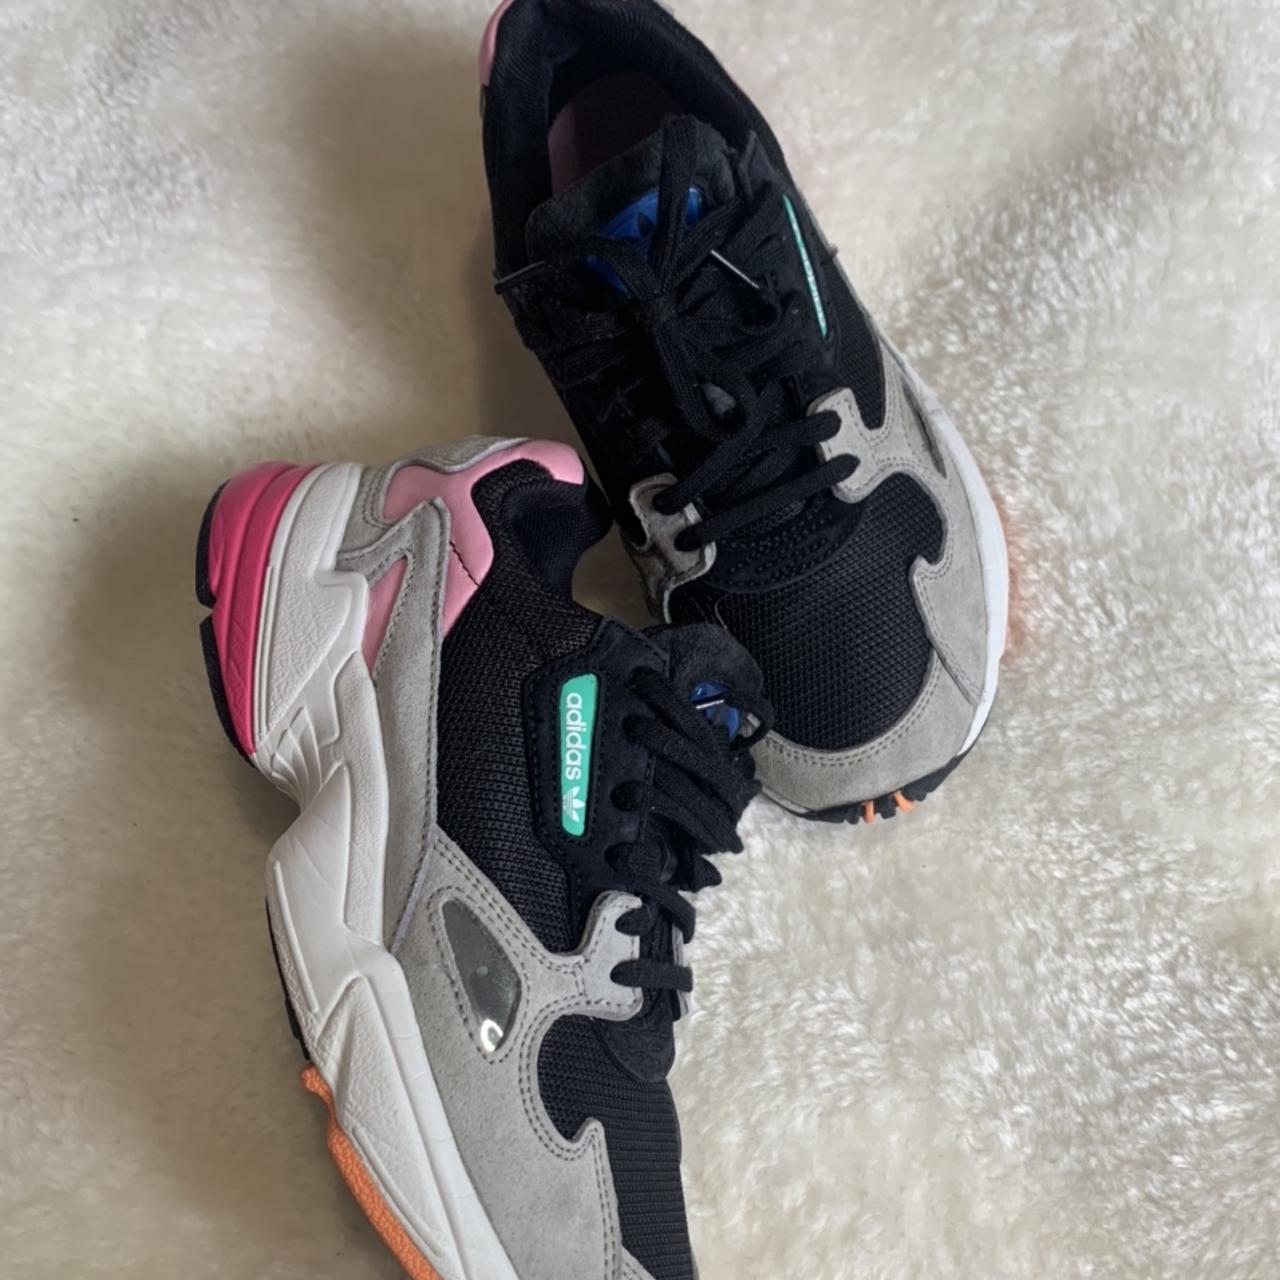 Where to Buy Kylie Jenner's Adidas Falcon Trainers UK